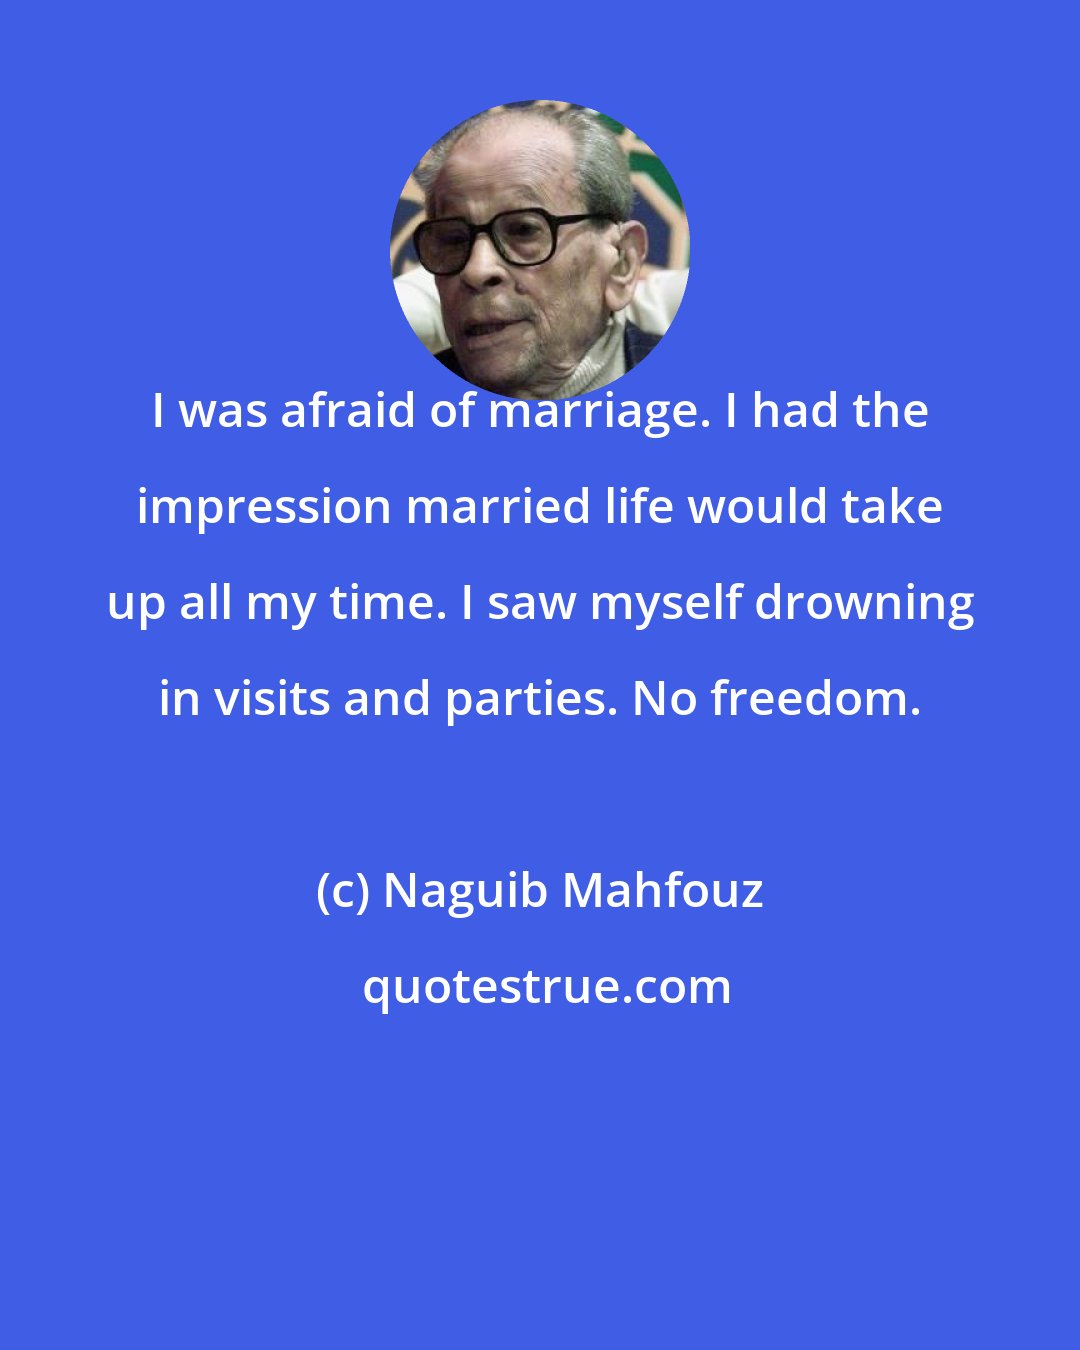 Naguib Mahfouz: I was afraid of marriage. I had the impression married life would take up all my time. I saw myself drowning in visits and parties. No freedom.